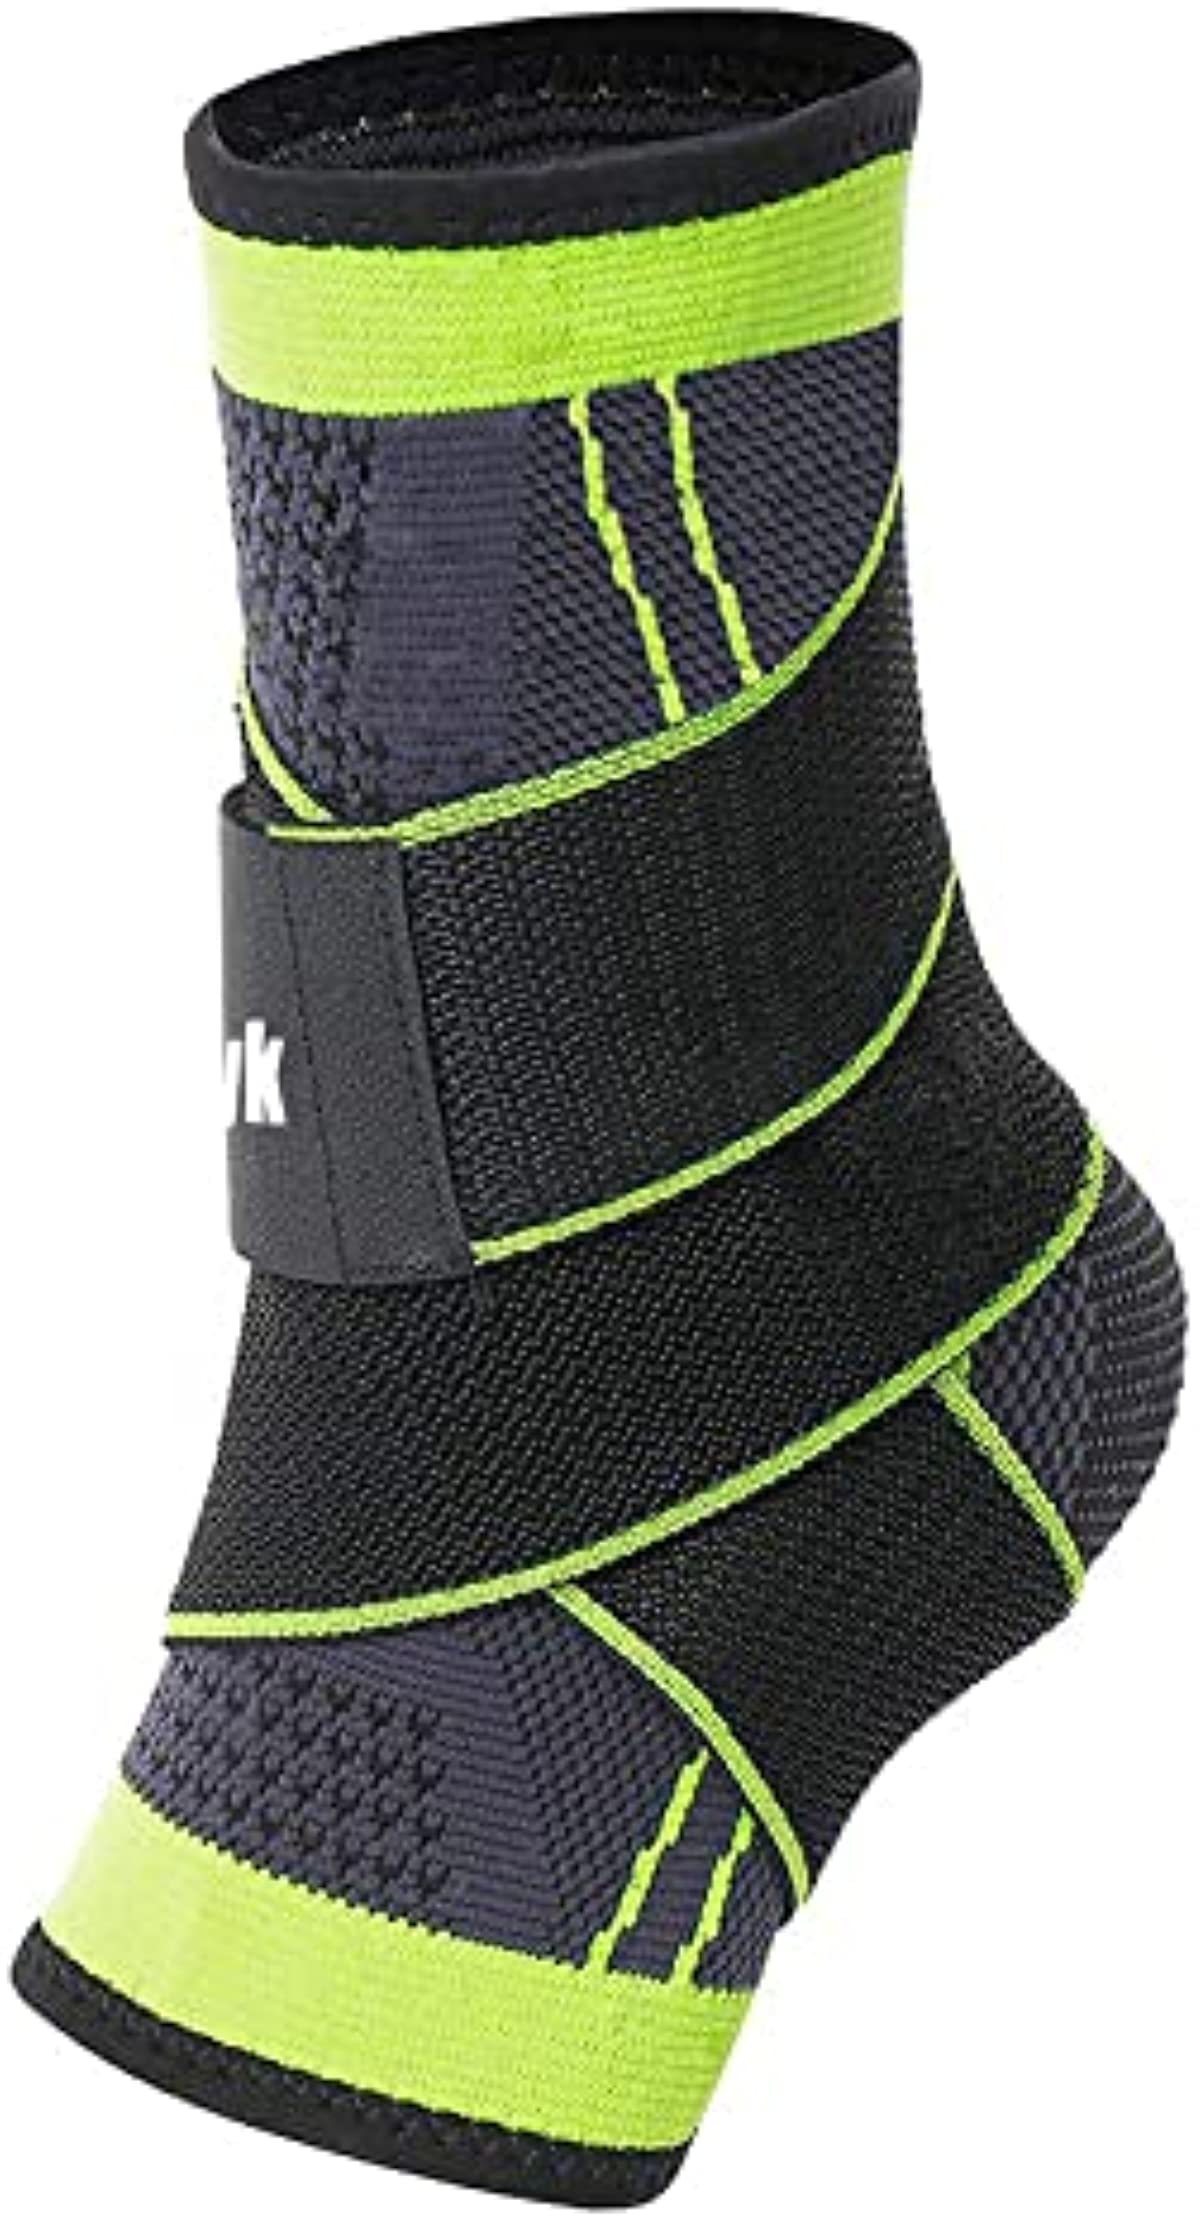 Ankle Braces, Adjustable Compression Ankle Support Men & Women, Strong Ankle Brace Sports Protection, Stabilize Ligaments-Eases Swelling and Sprained Ankle (X-Large, Green, 1)